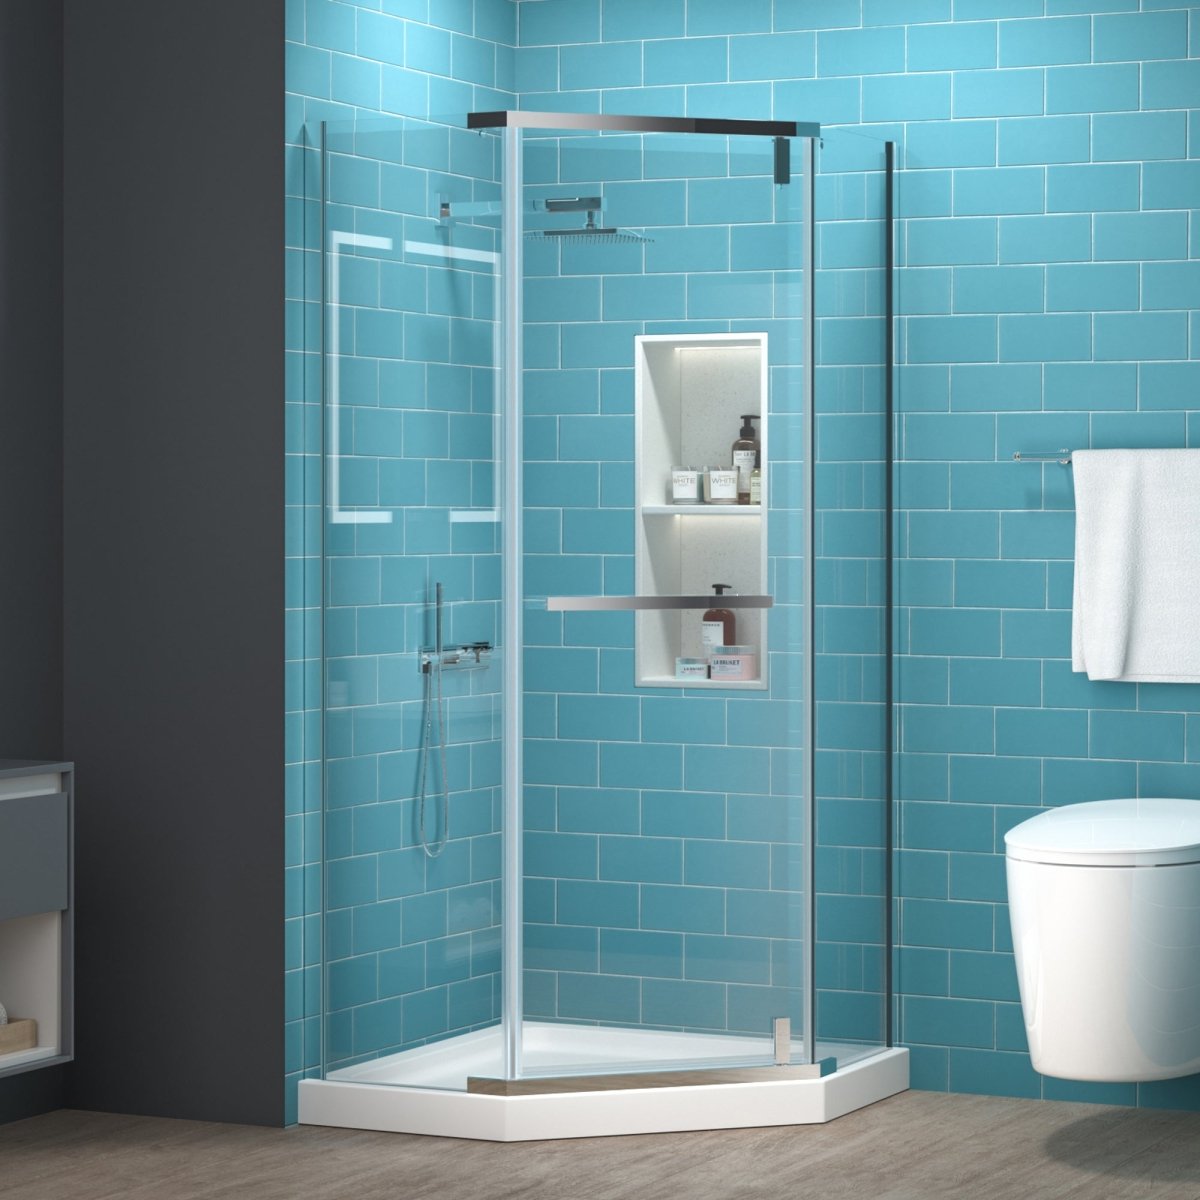 Prism Neo-Angle Frameless Shower Door 36 in. W x 72 in. H,Corner Shower Enclosure,6mm Clear Glass,Pivot Shower Doors,Chrome,Not Base